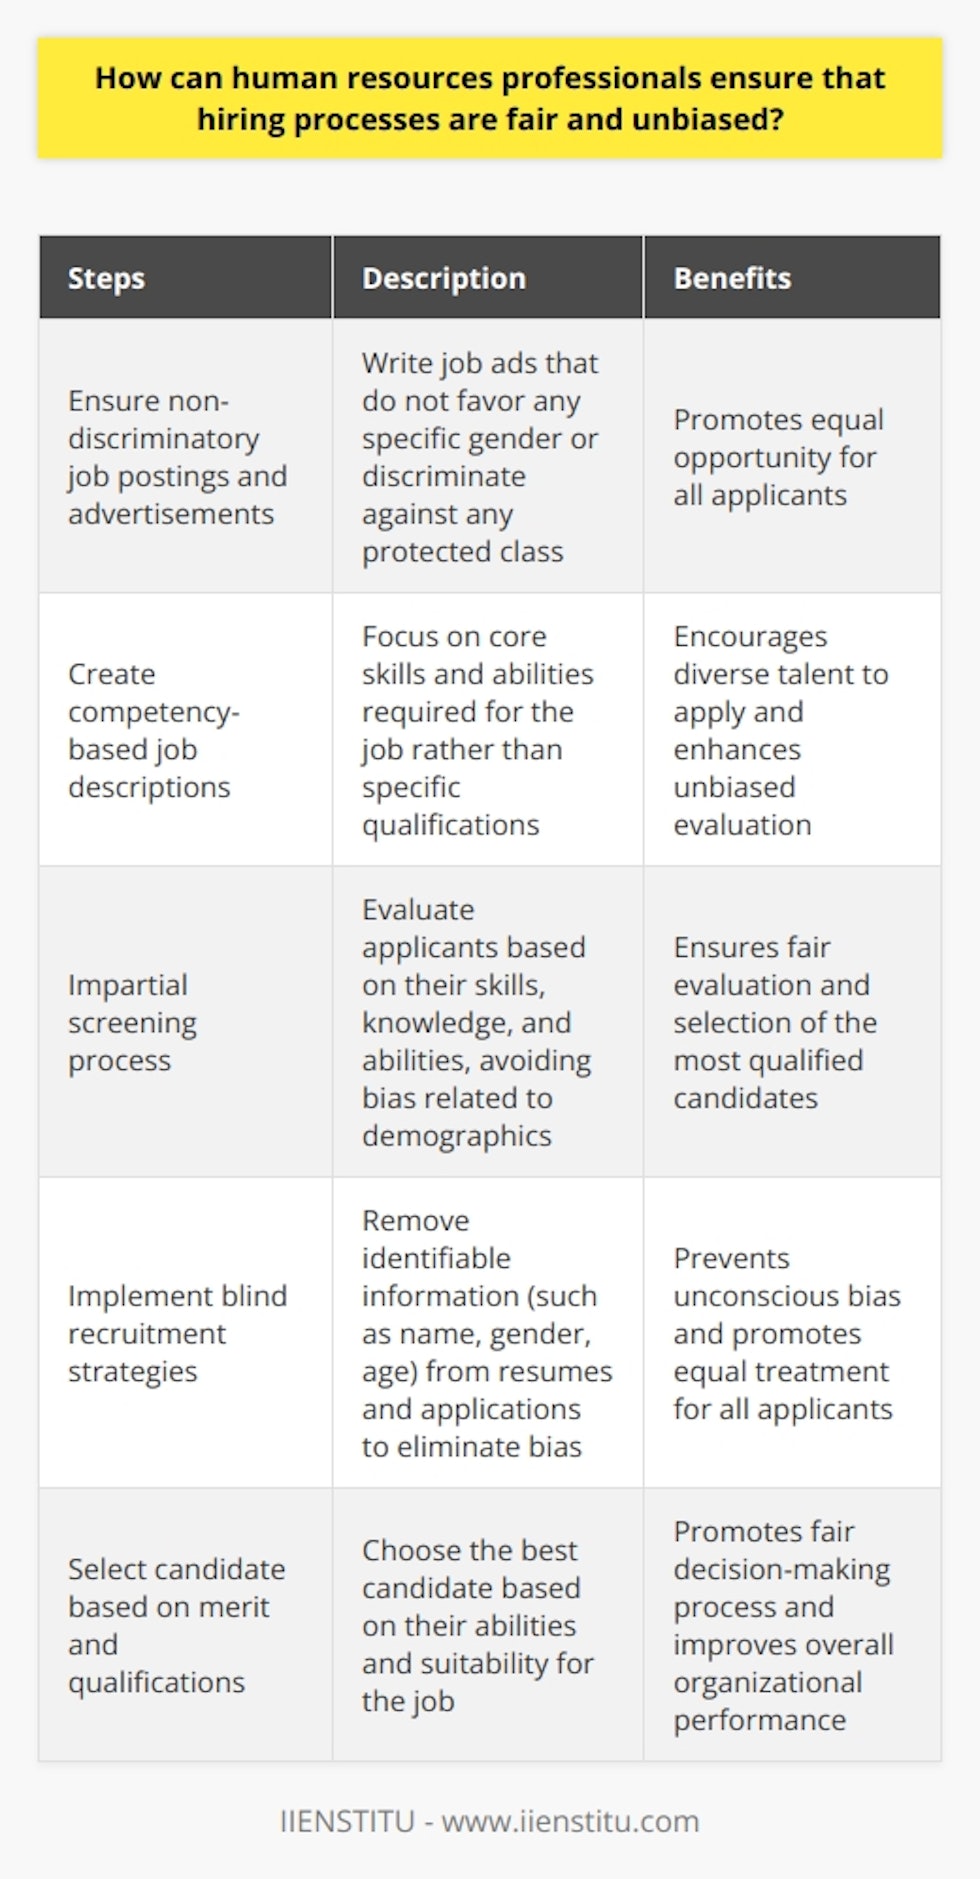 In conclusion, human resources professionals can ensure fair and unbiased hiring processes by following several key steps. Firstly, they should ensure that job postings and advertisements are written in a non-discriminatory and gender-neutral manner. Secondly, it is important to develop job descriptions that focus on core competencies rather than specific qualifications or experiences. Thirdly, the screening process should be impartial, focusing on skills and abilities rather than demographic factors. Finally, implementing strategies like blind recruitment can further eliminate bias and promote equal treatment of all applicants. Through these measures, human resources professionals can play a crucial role in creating fair and unbiased hiring processes, resulting in the selection of the best candidate for the job, based on merit and qualifications.